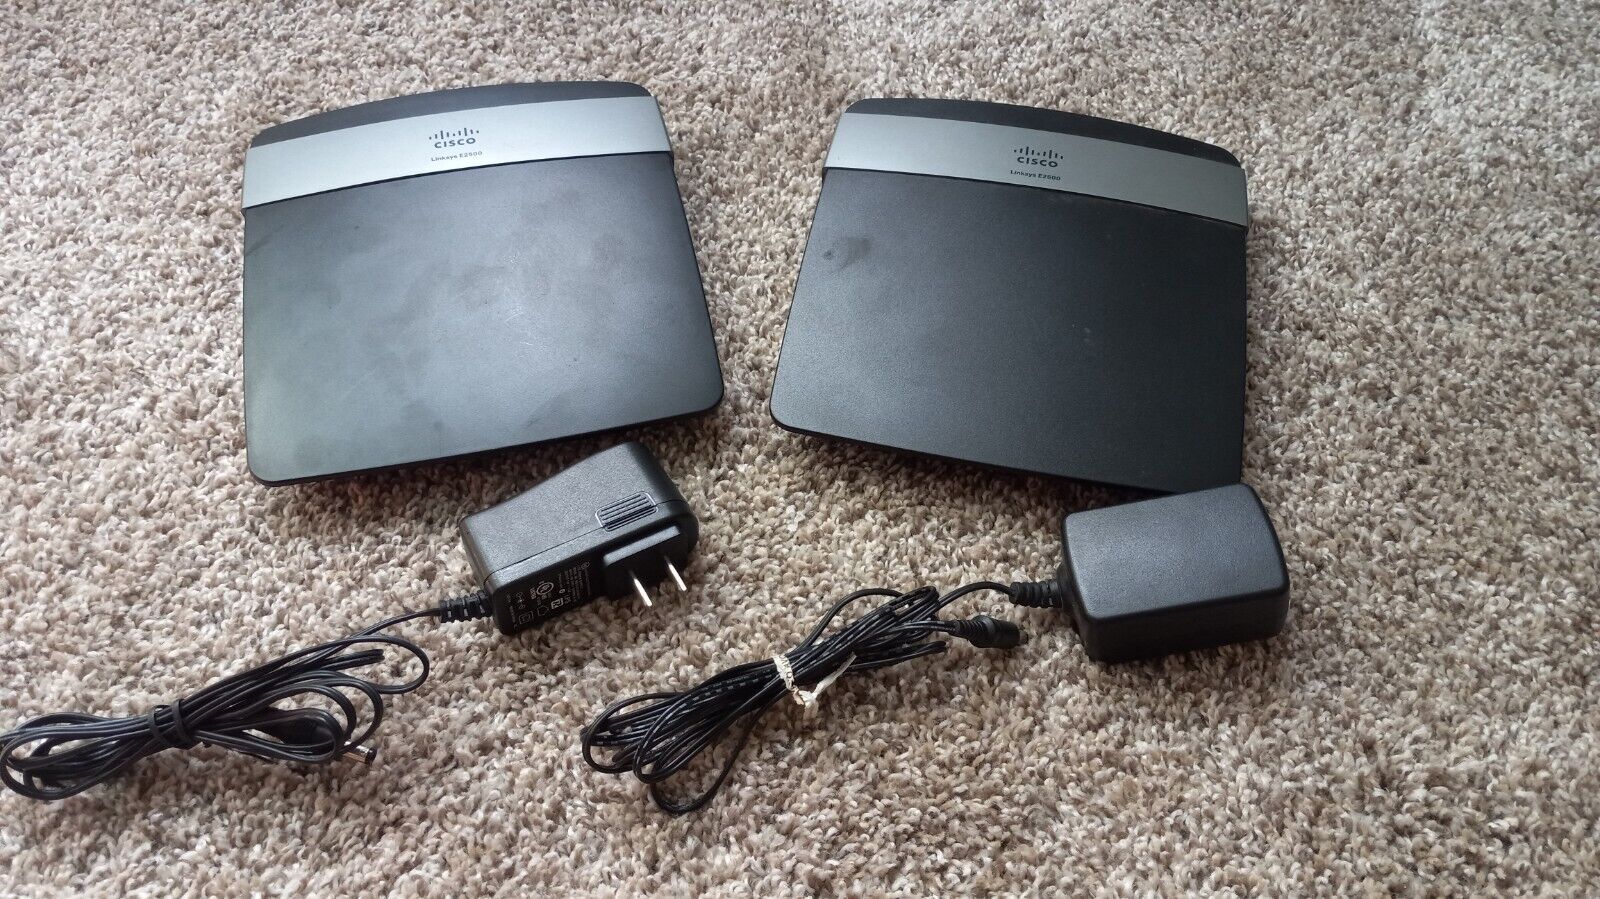 2 Linksys E2500 300 Mbps 4-Port 10/100 Wireless N Routers